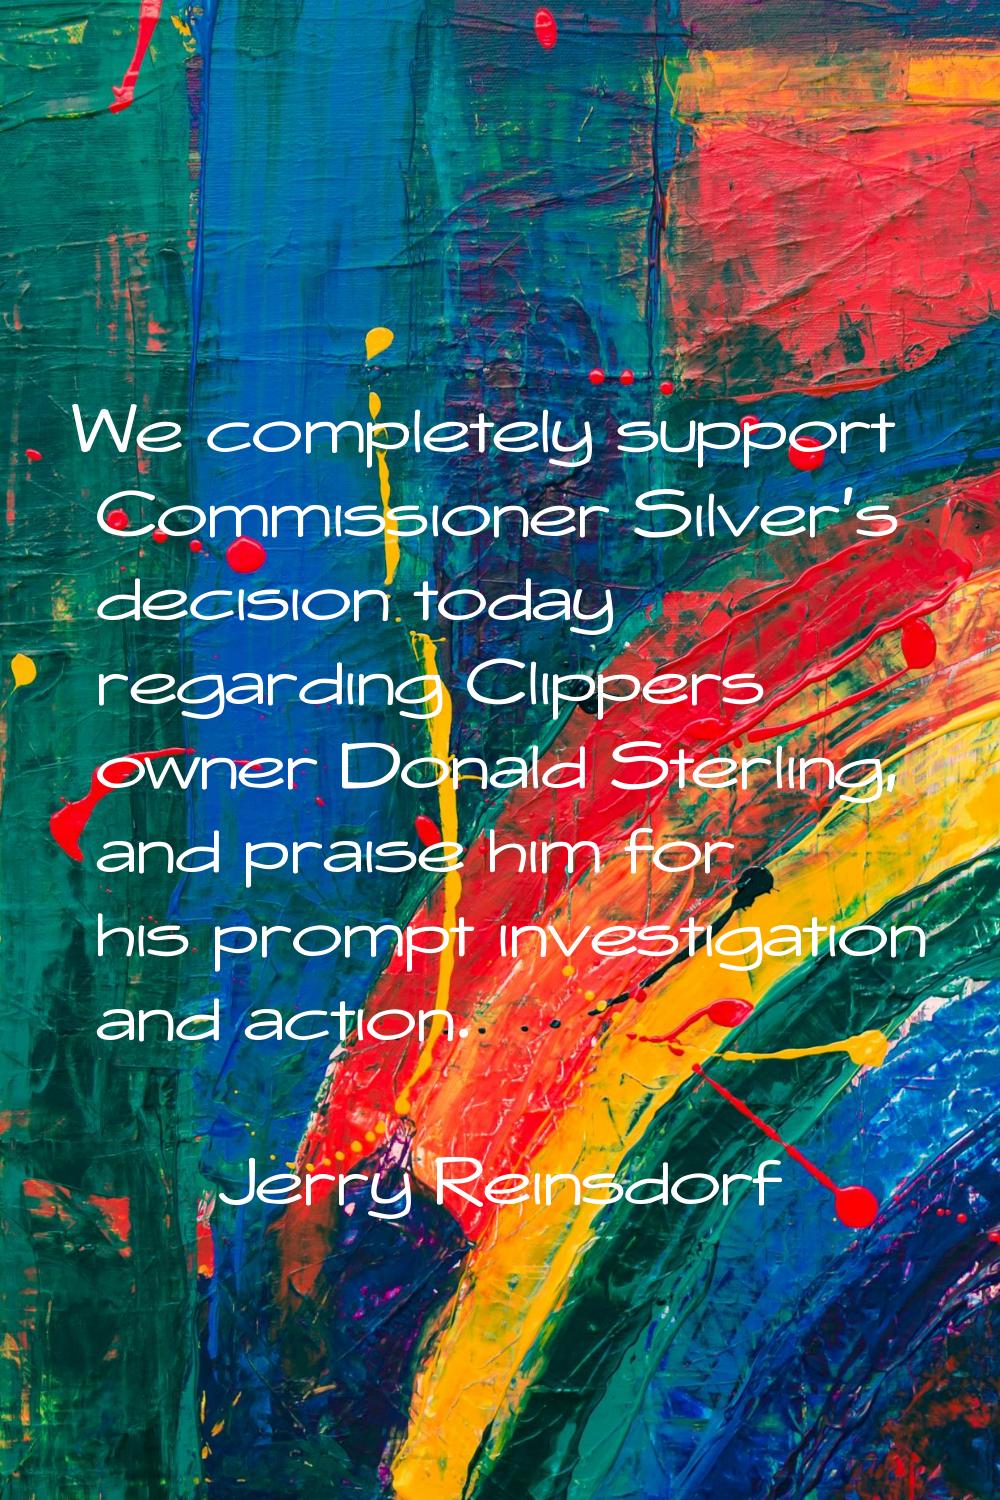 We completely support Commissioner Silver's decision today regarding Clippers owner Donald Sterling